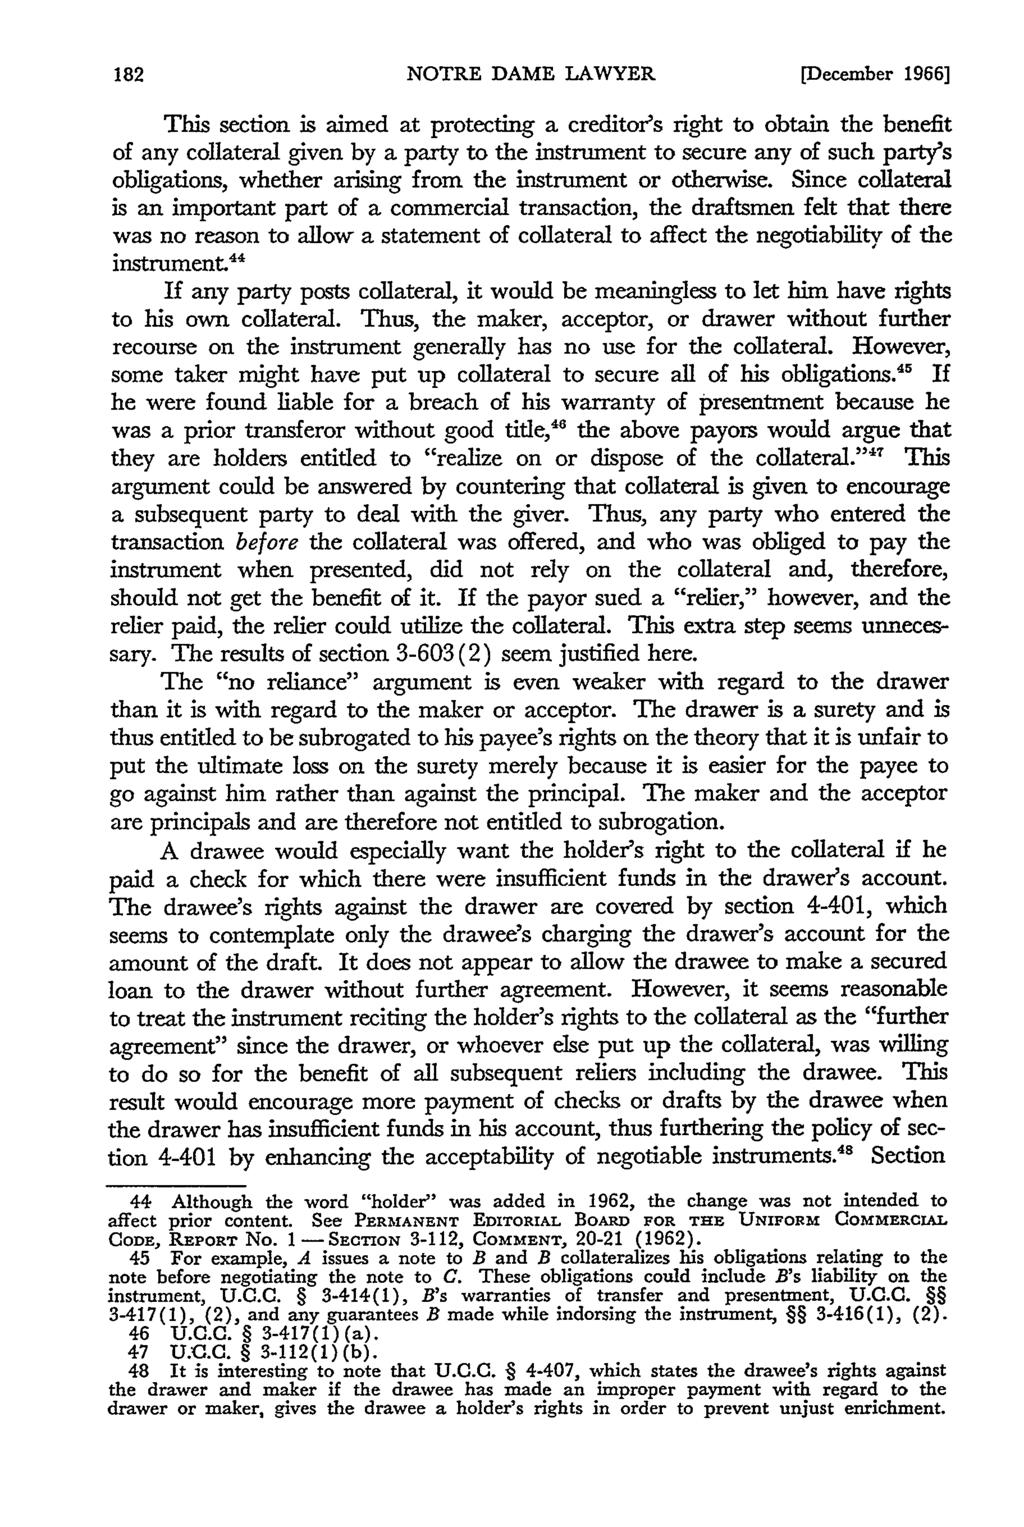 NOTRE DAME LAWYER [December 1966] This section is aimed at protecting a creditor's right to obtain the benefit of any collateral given by a party to the instrument to secure any of such party's